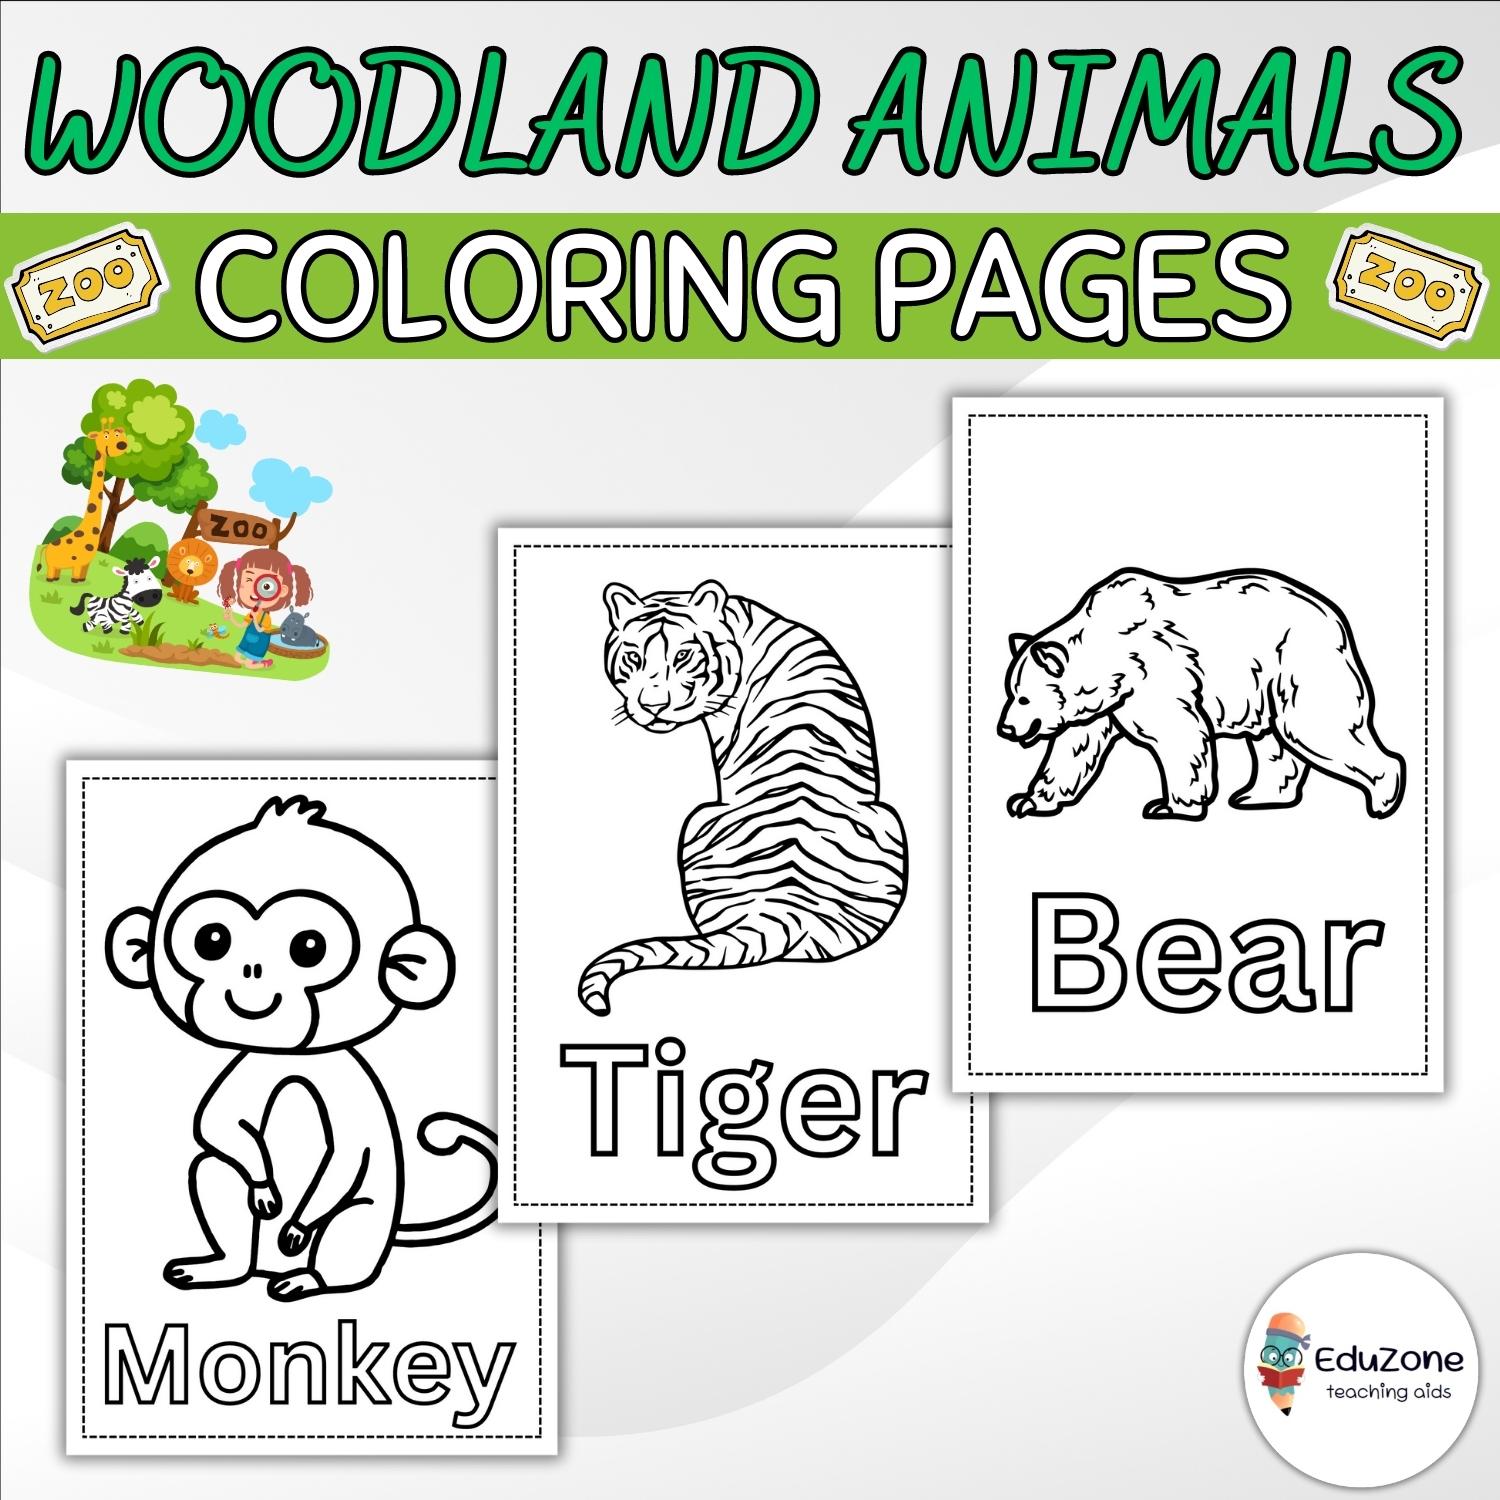 Woodland animals coloring pages for toddlers a fun and easy way to learn about animals made by teachers